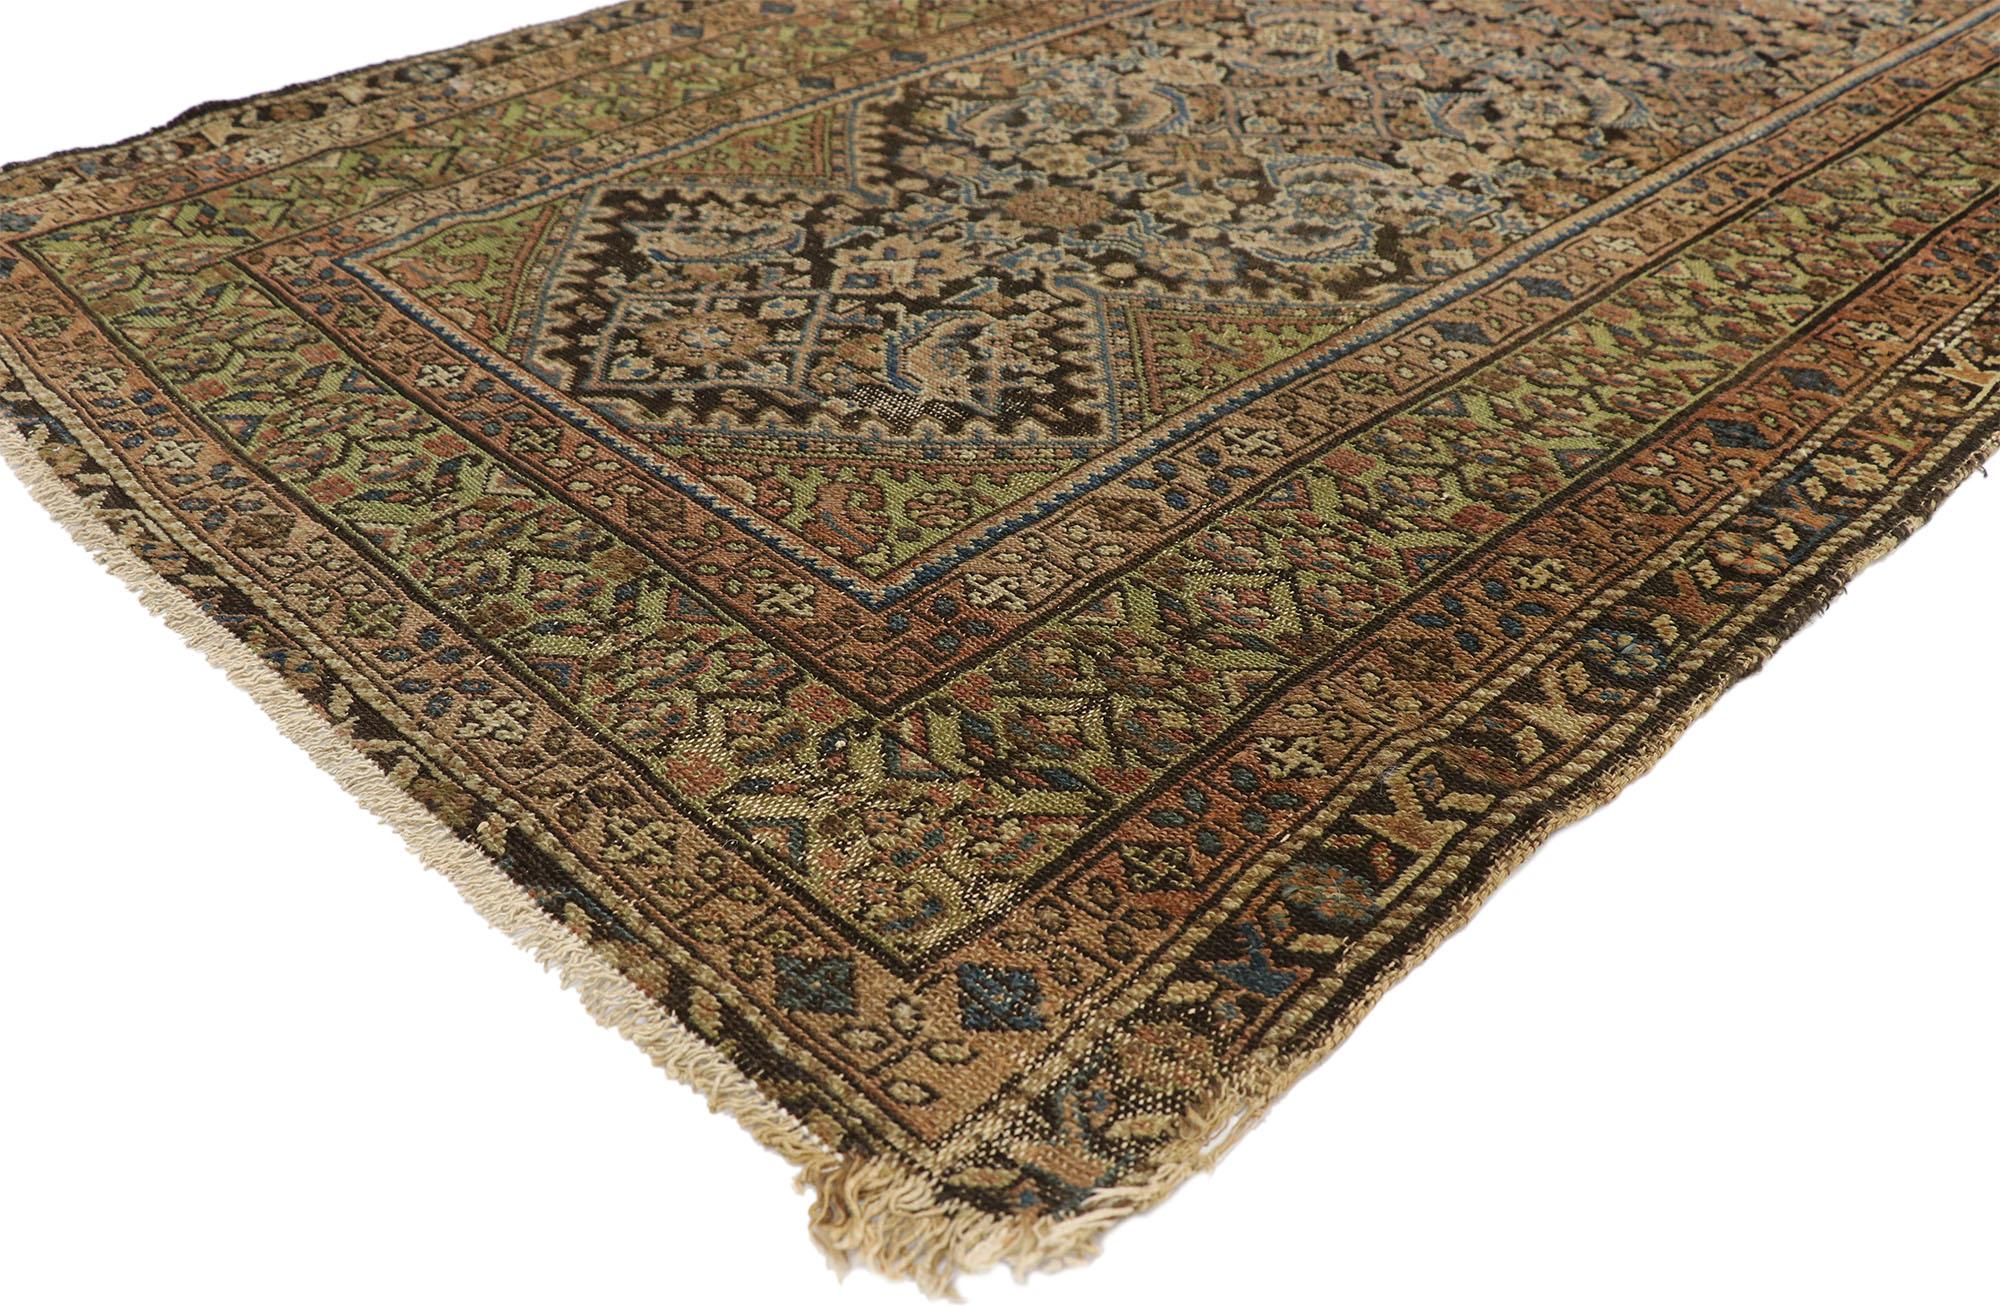 76793 Antique Persian Malayer Rug Runner, 03'06 x 16'08. Persian Malayer carpet runners, originating from the Malayer region in western Iran, are meticulously crafted rugs known for their long and narrow dimensions, making them ideal for hallways,